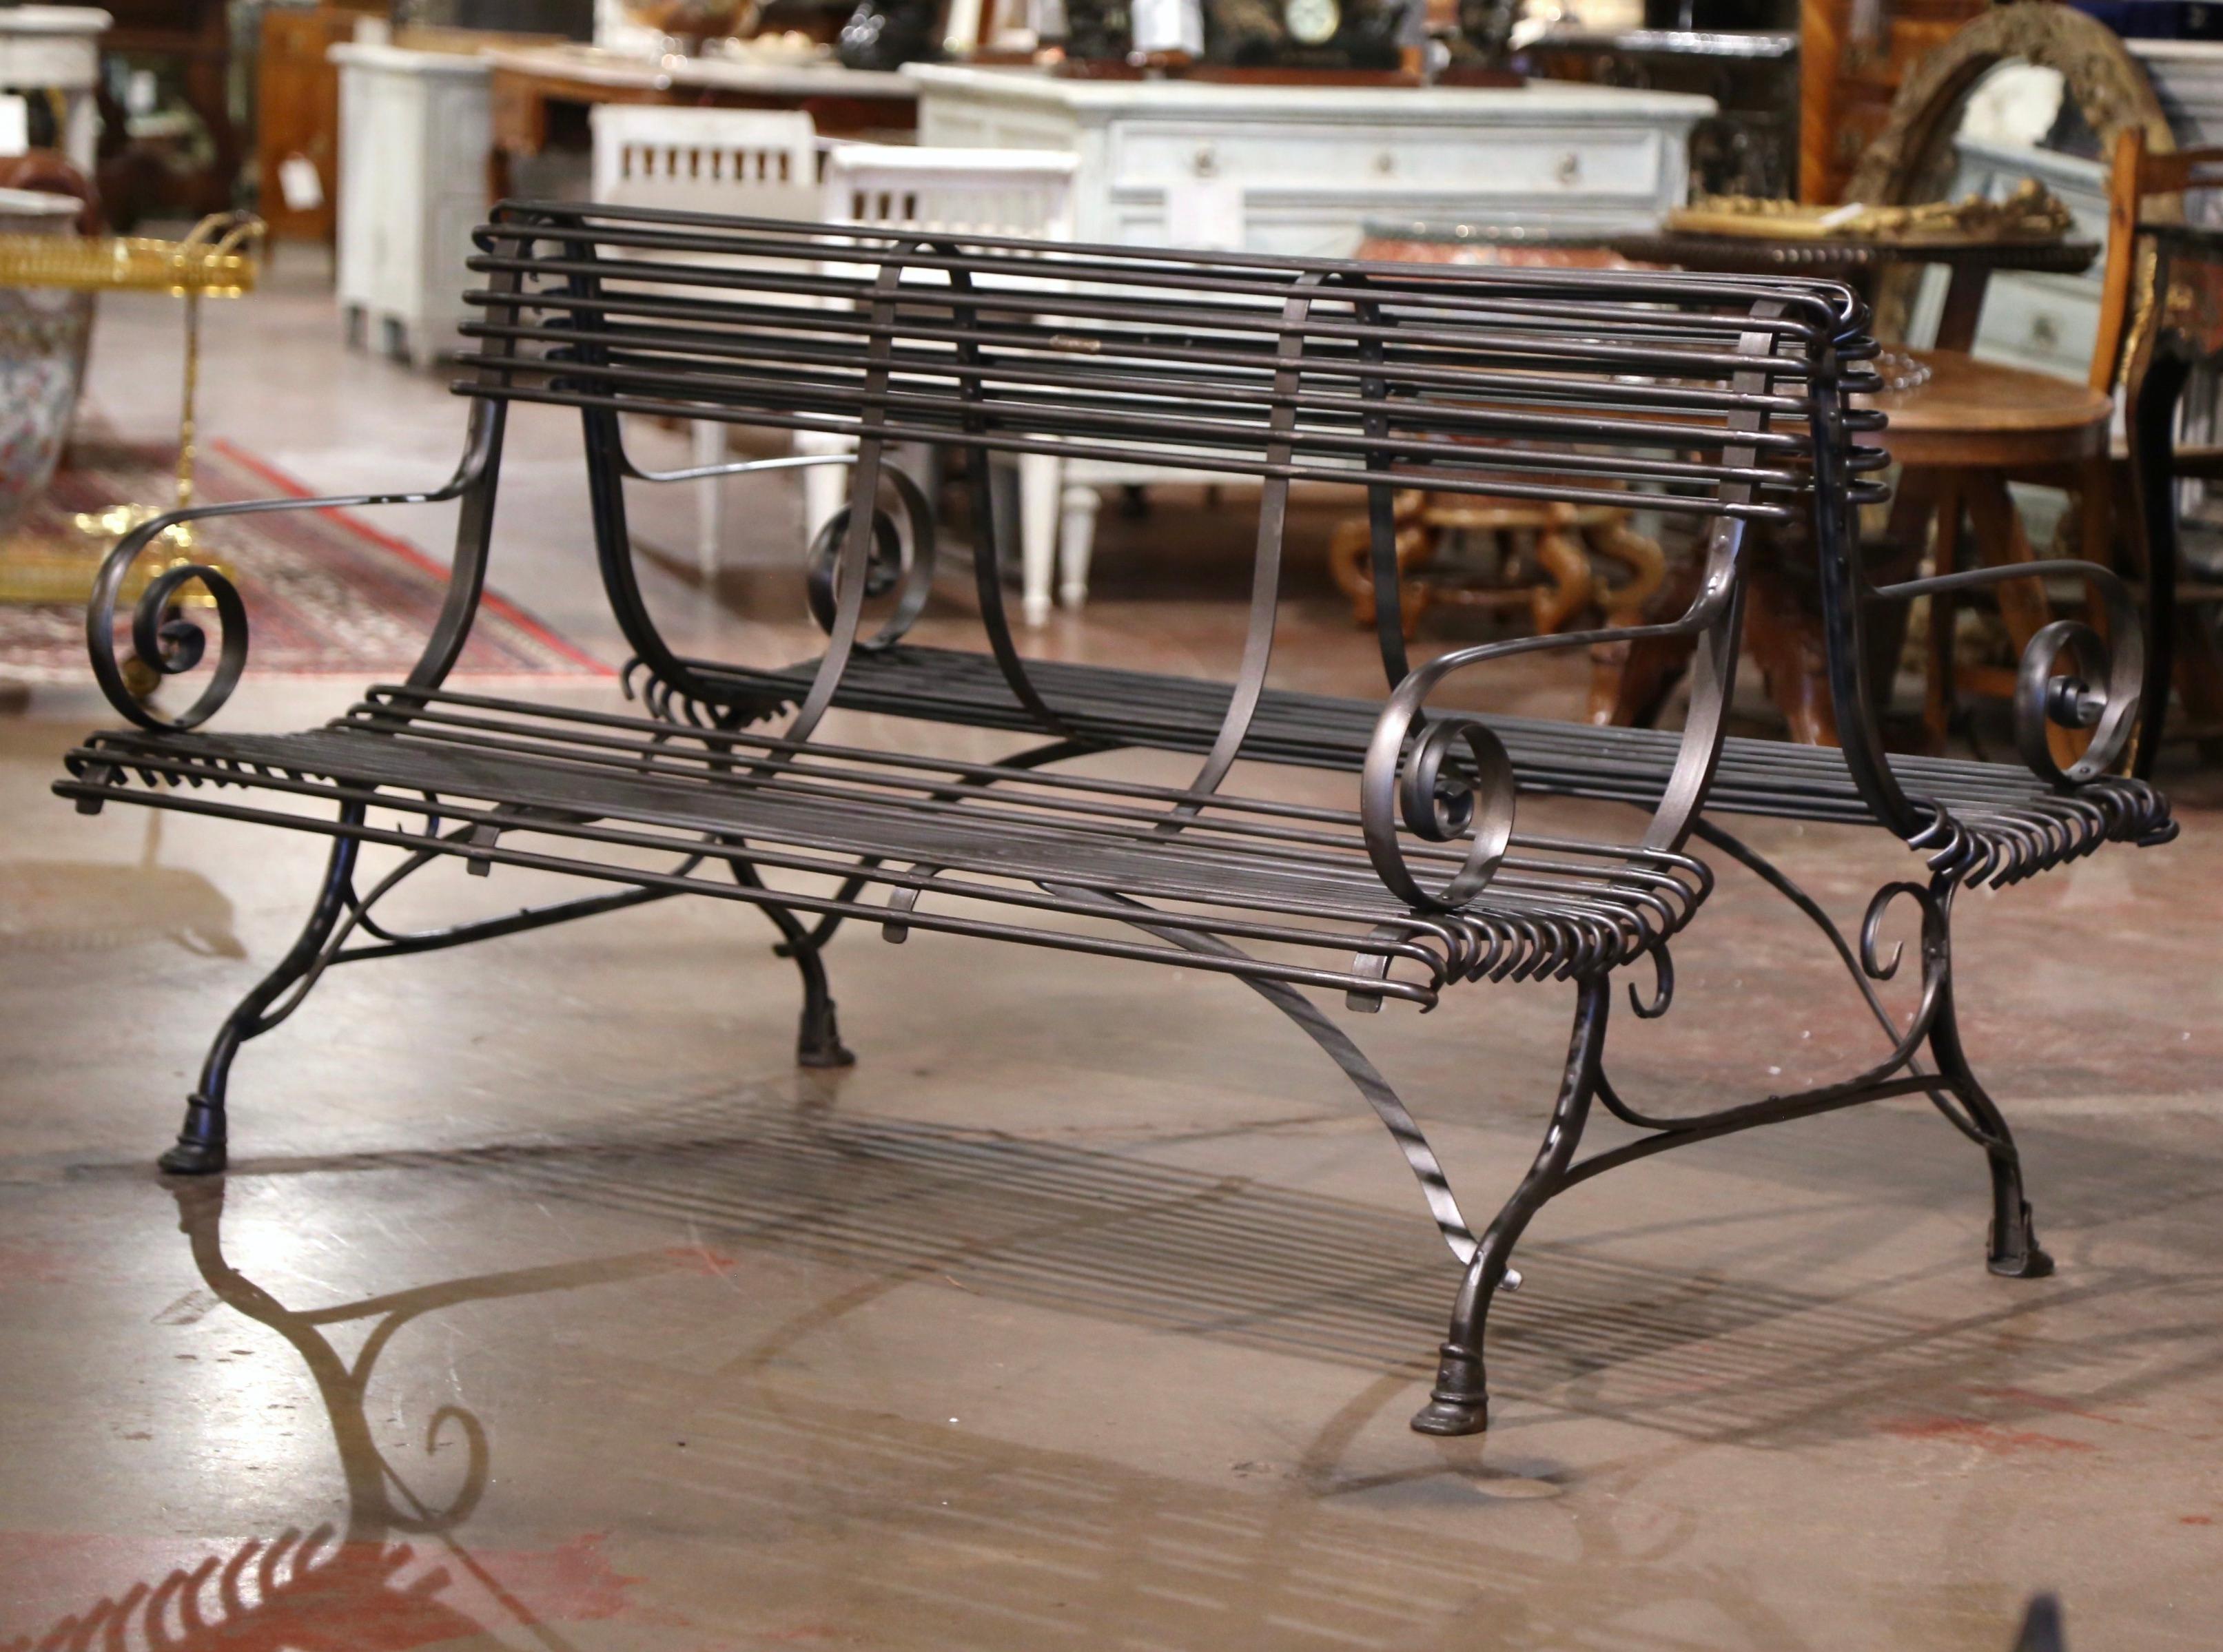 Add extra seating to a covered outdoor space with this elegant yet simple forged iron double bench from France. Complete with a gun barrel finish, the six-seat bench has gracious lines, beautifully scrolled armrests, a curved back and four legs